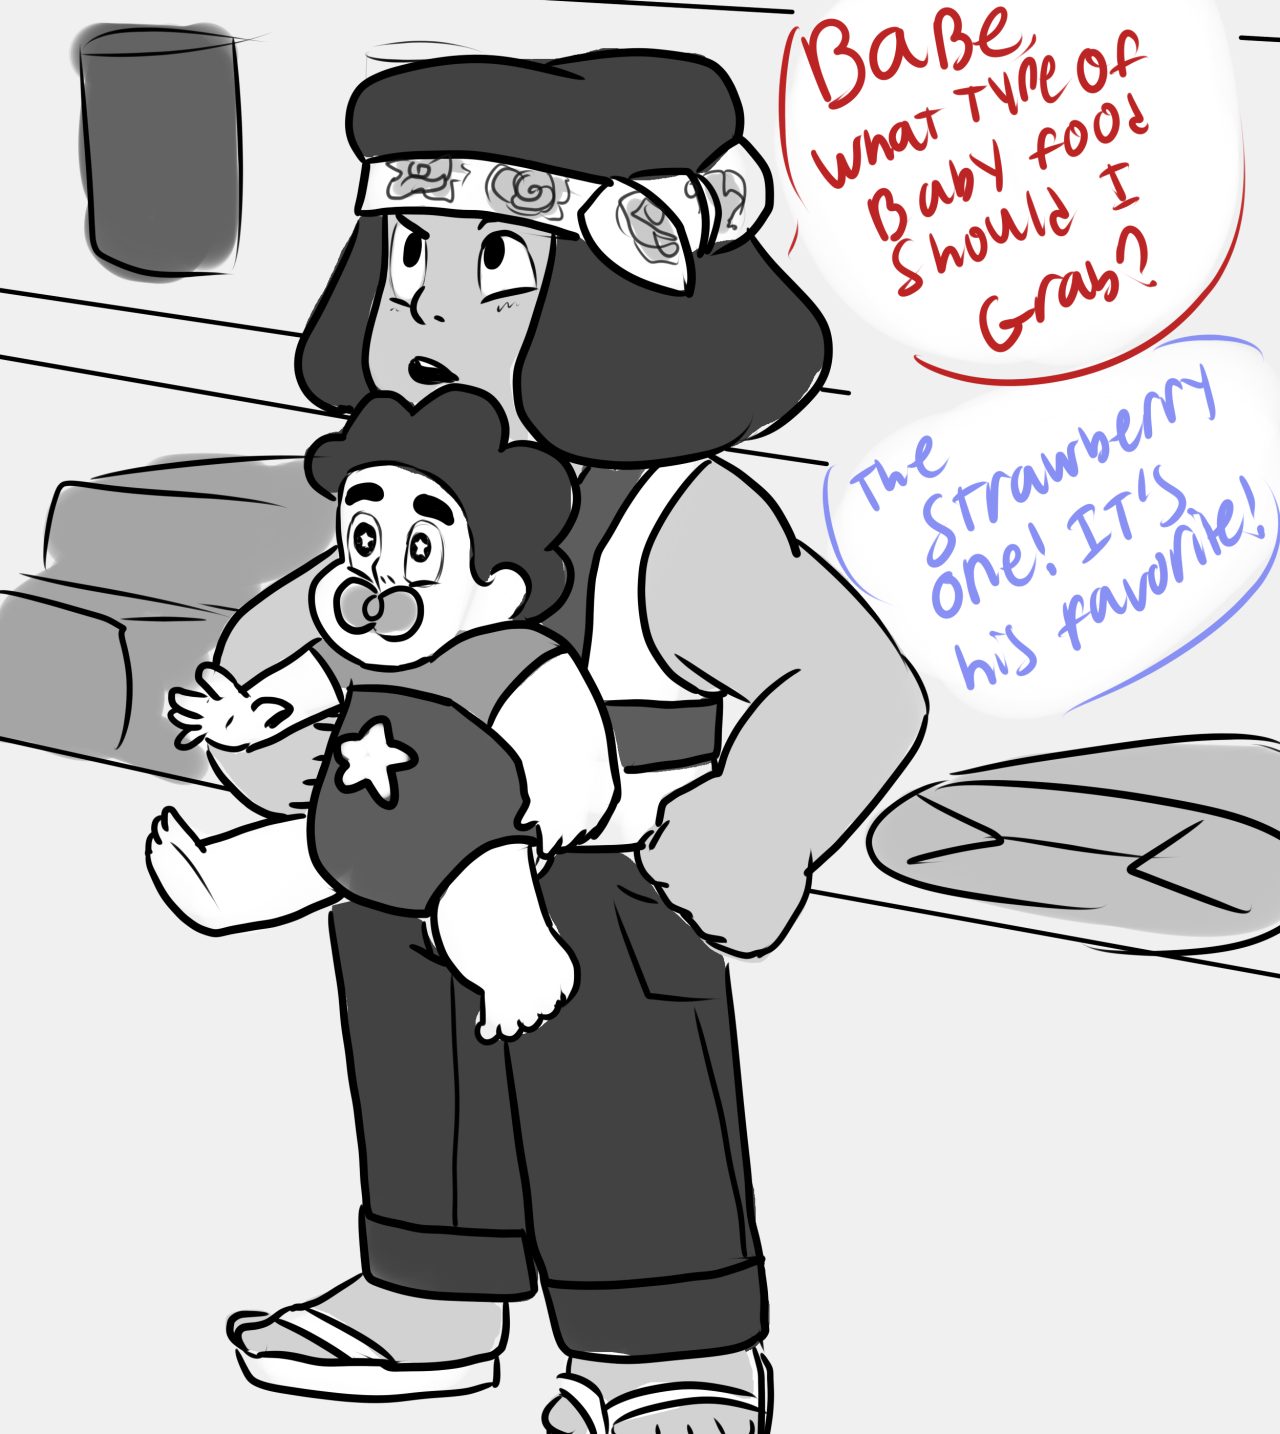 jen-iii:  Tiny moms au where Steven actually met Ruby and Sapphire before Jailbreak